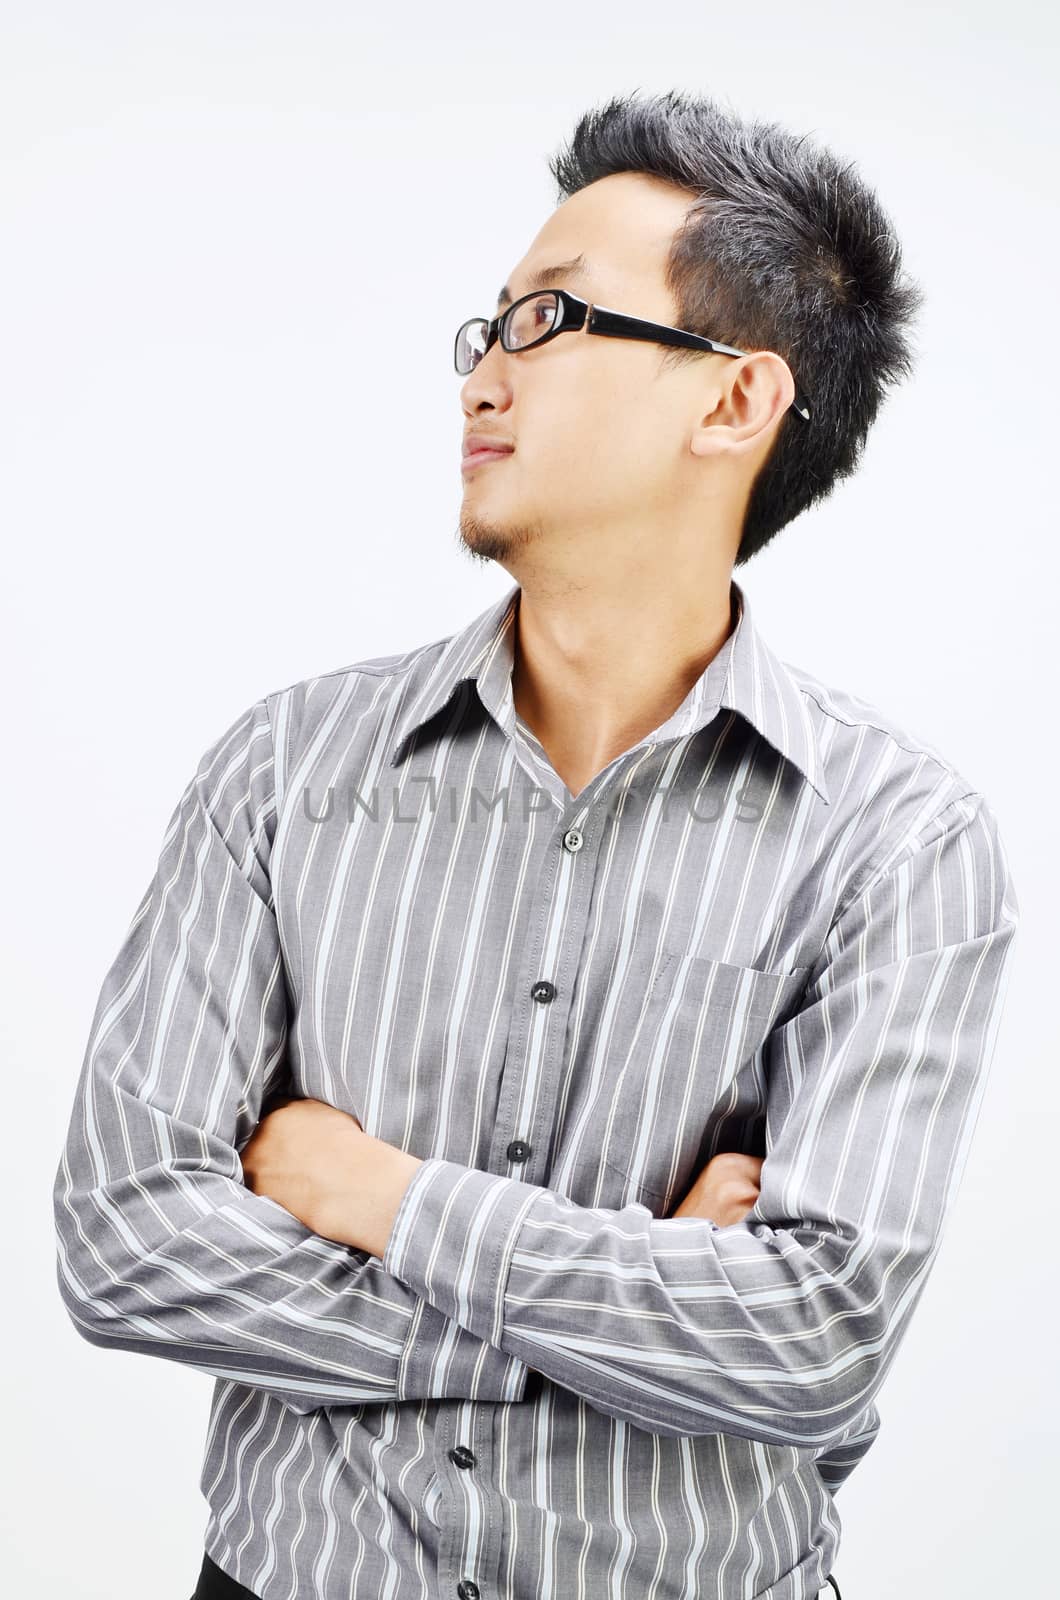 Portrait of cool Asian businessman arms crossed and looking at side, standing isolated on plain background.